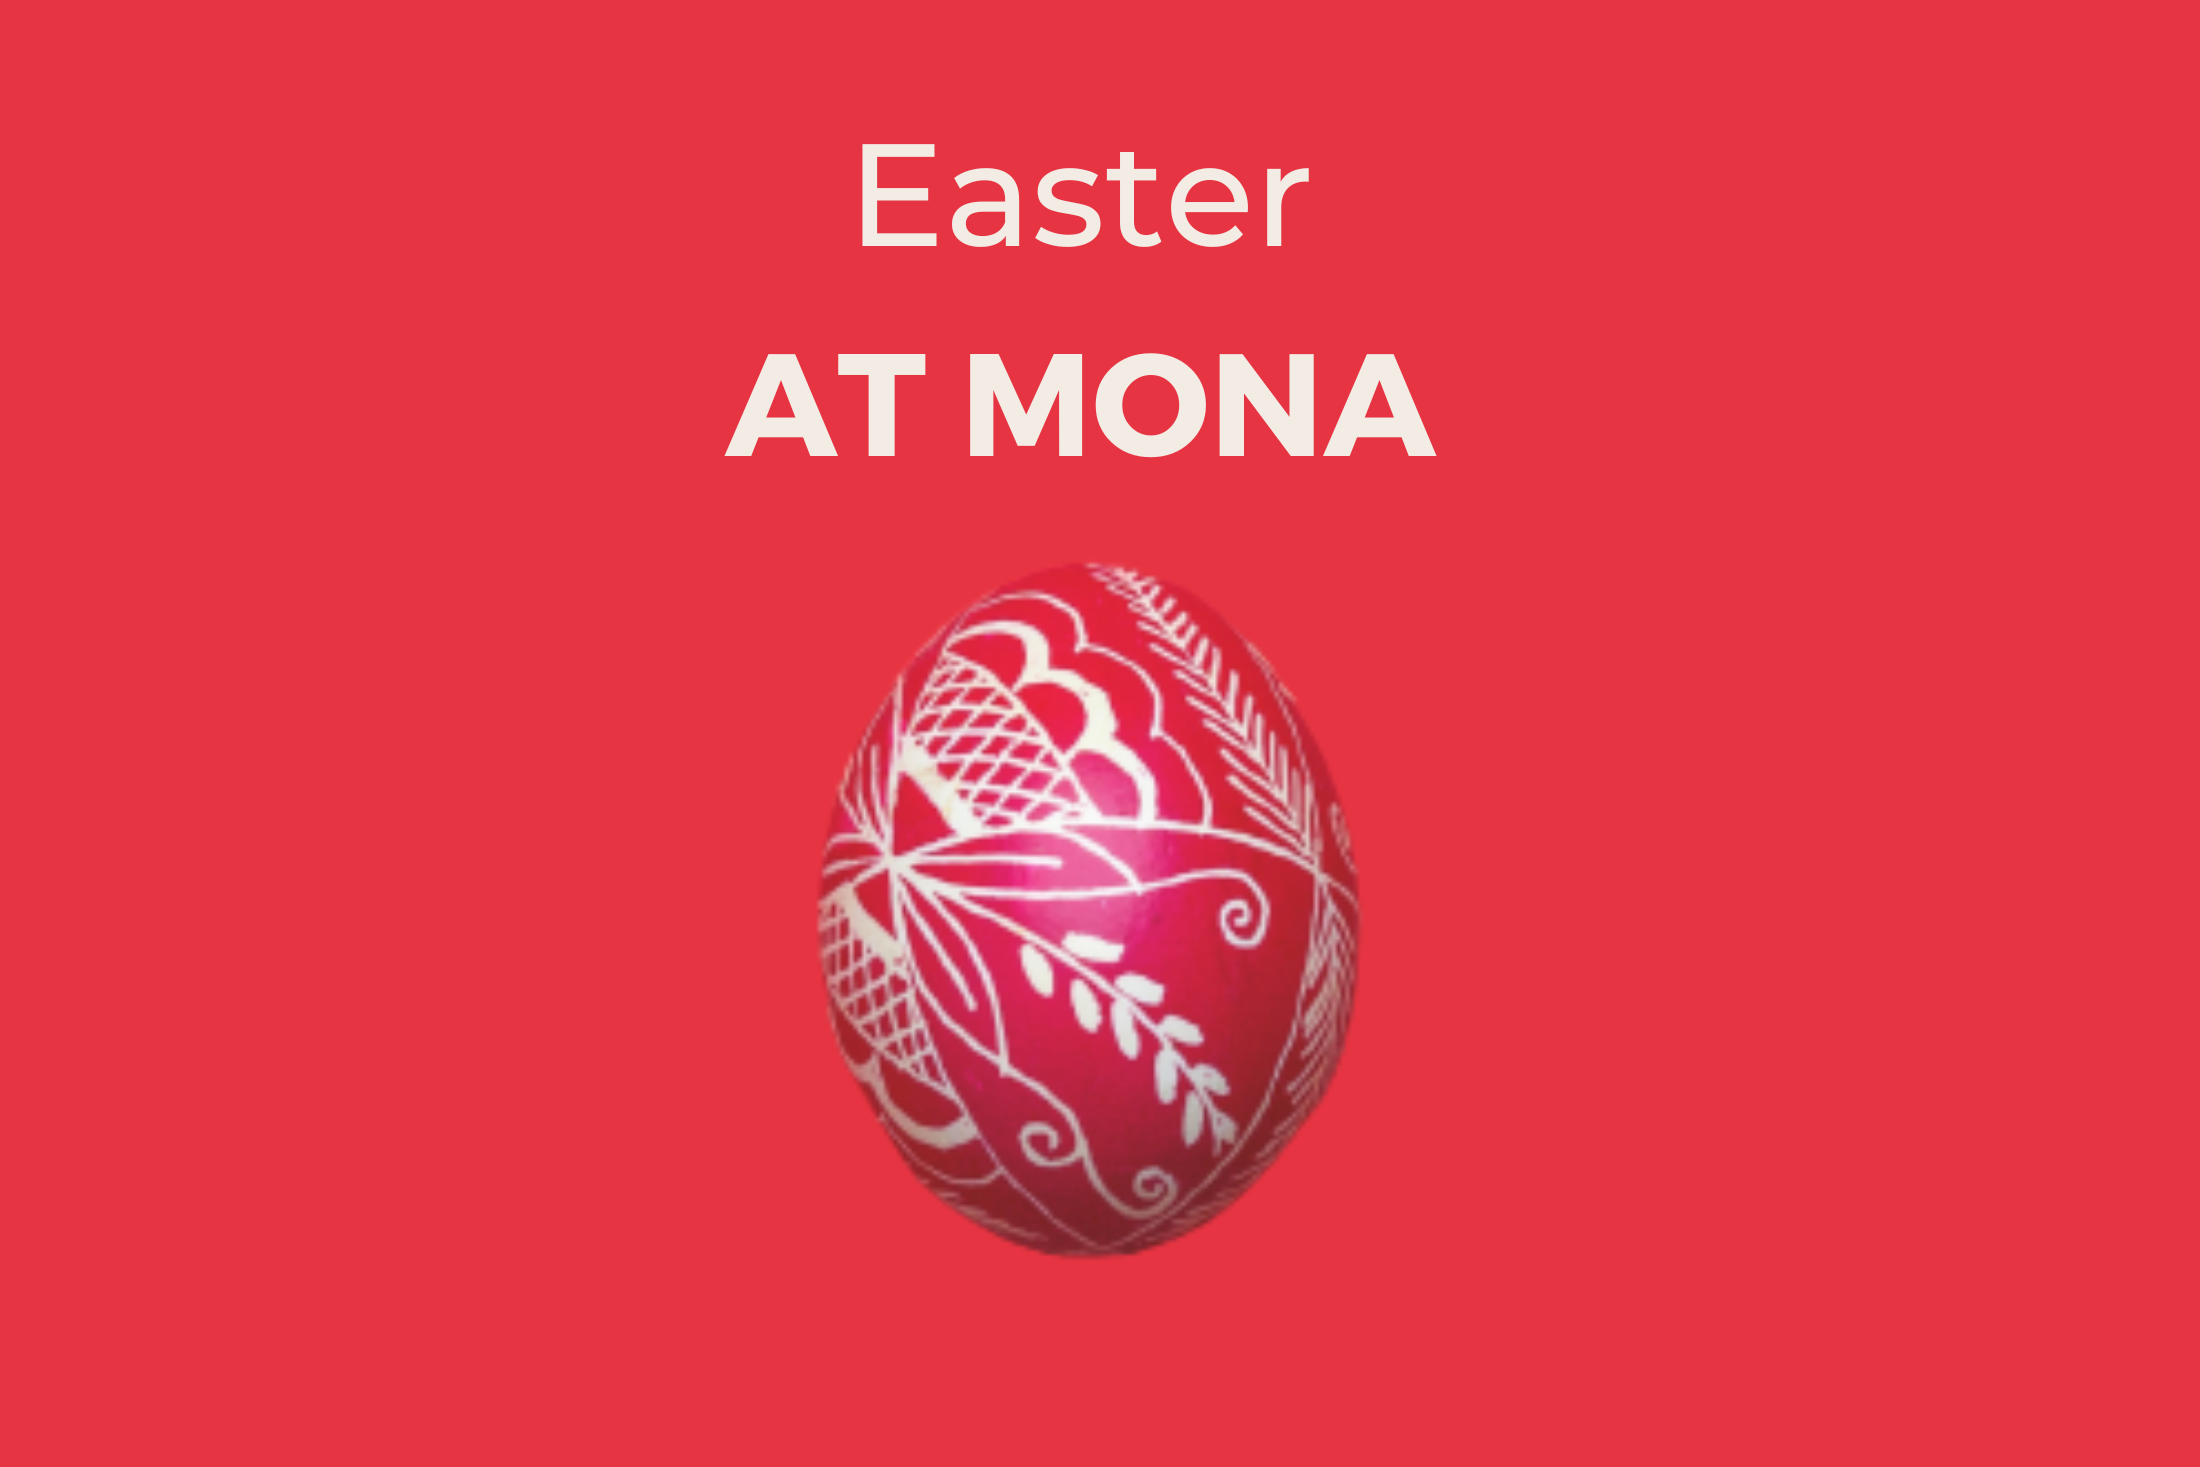 Easter in Mona